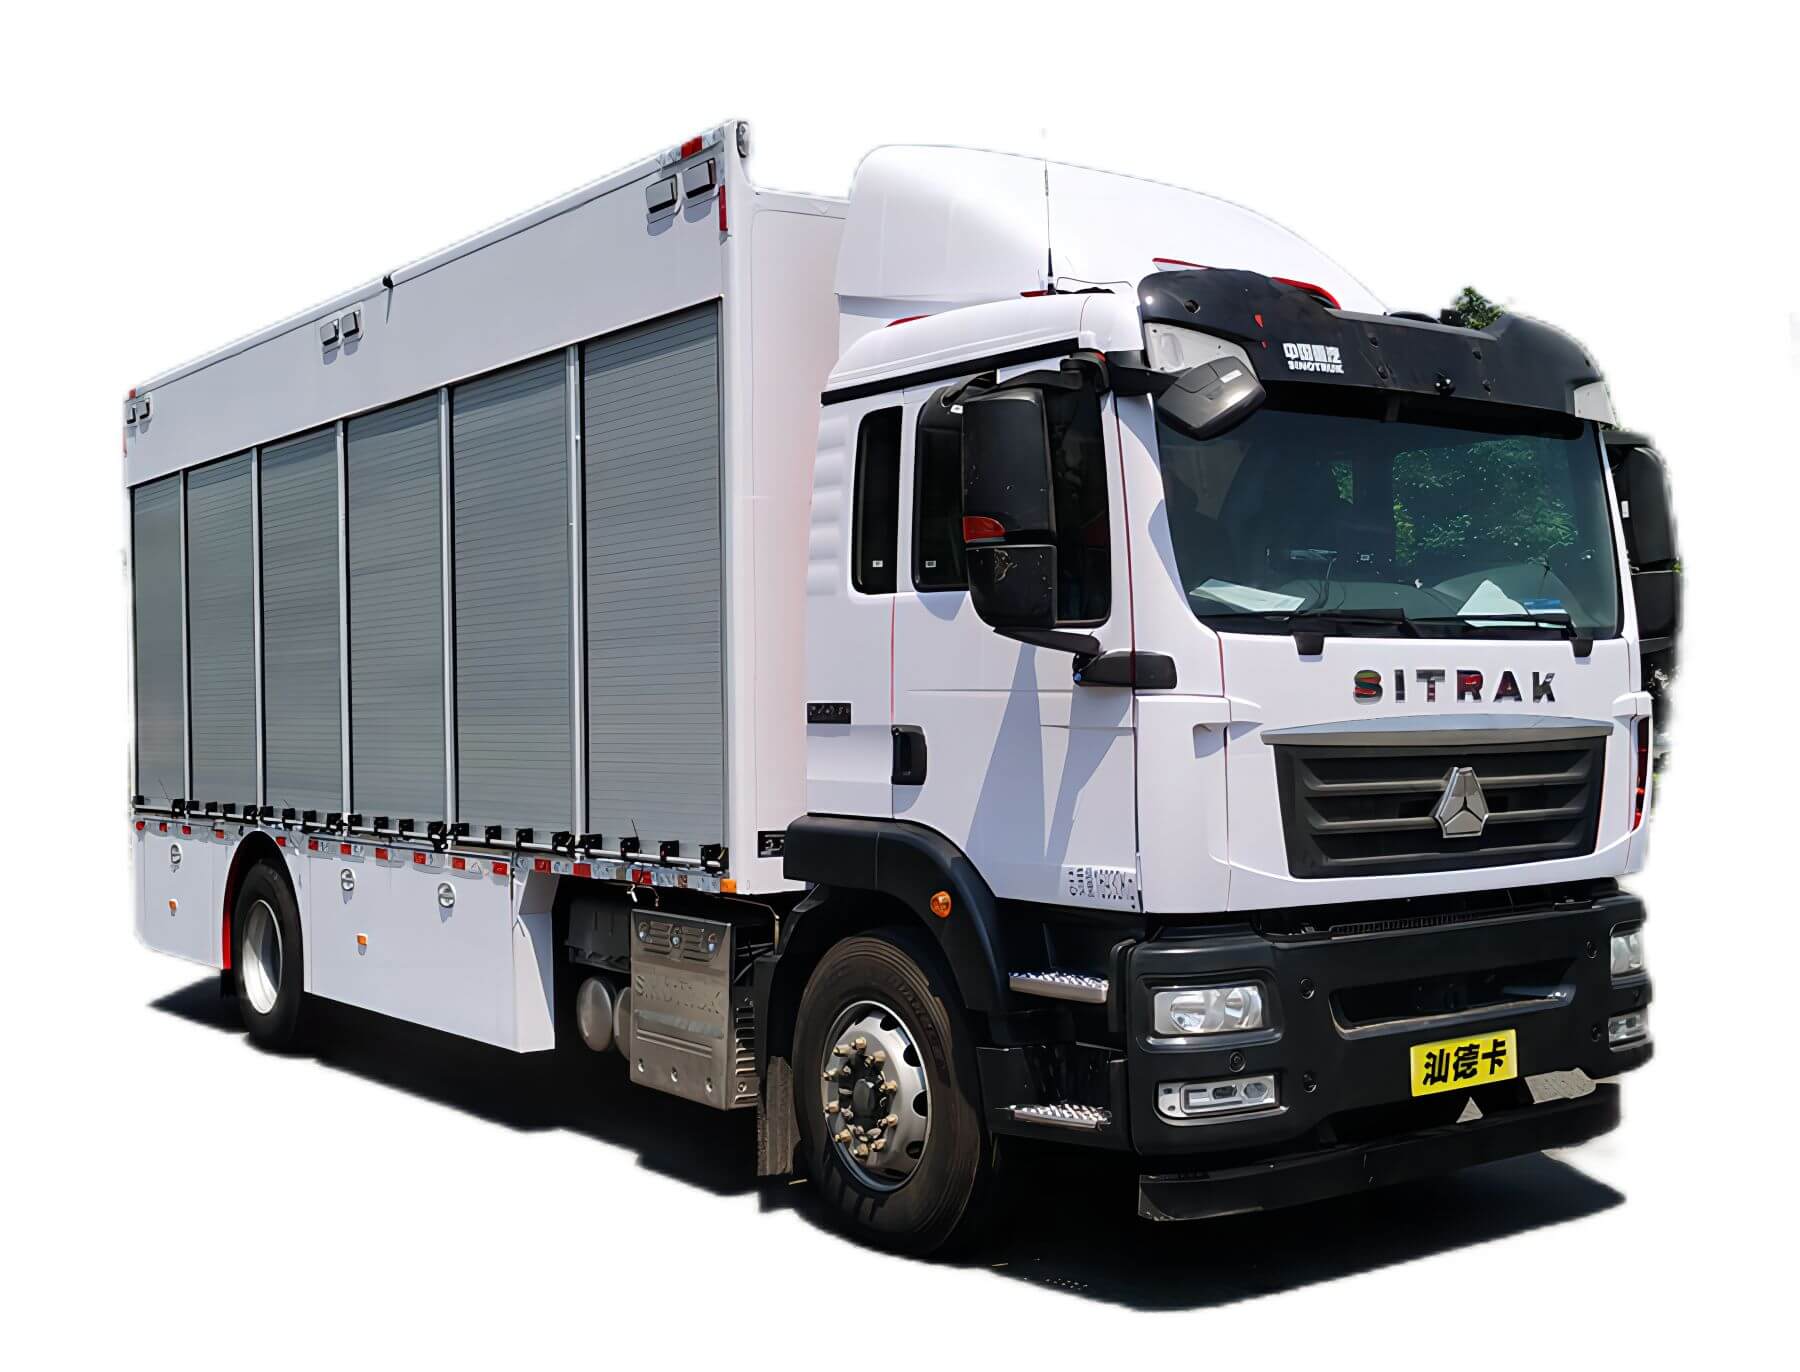 Customizing SITRAK Water Treatment Truck with Water Purification Equipment